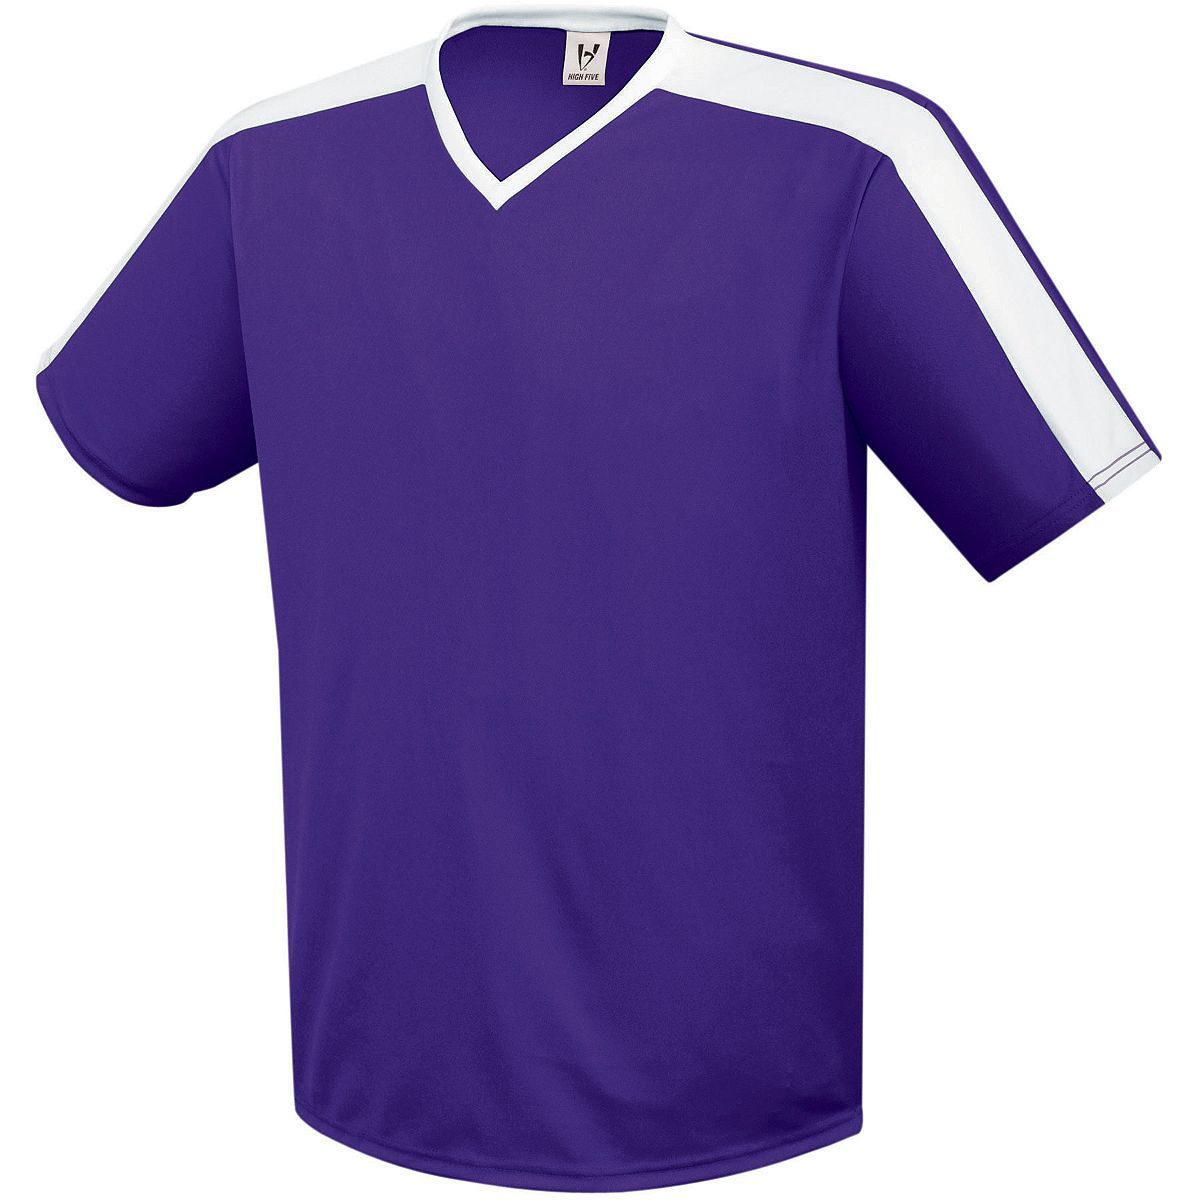 High 5 Youth Genesis Soccer Jersey in Purple/White  -Part of the Youth, Youth-Jersey, High5-Products, Soccer, Shirts, All-Sports-1 product lines at KanaleyCreations.com